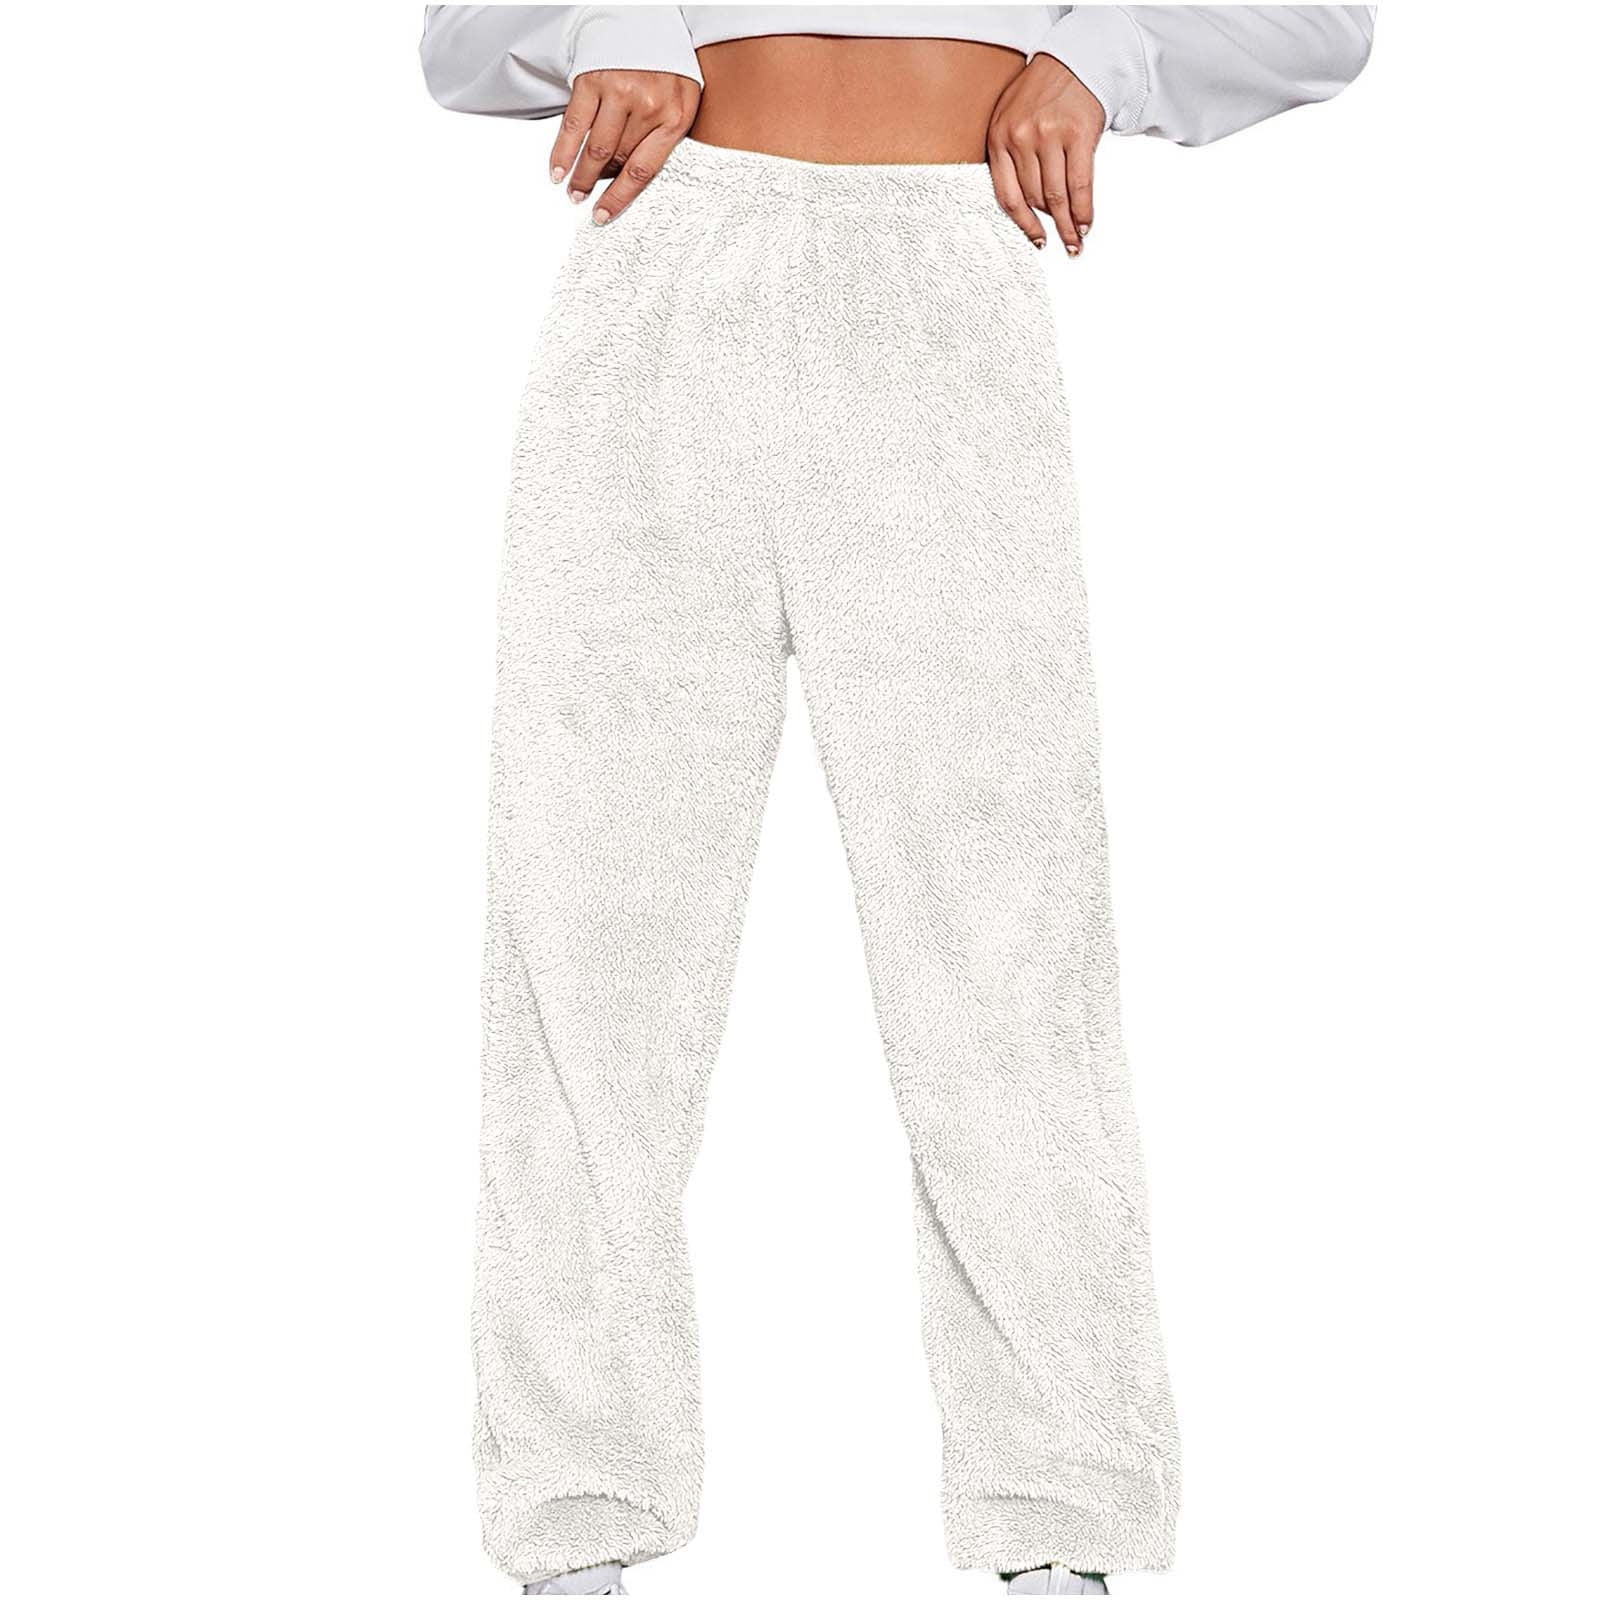 RQYYD Womens Plus Size Fuzzy Fleece Pants Winter Warm Thicken Jogger  Athletic Sweatpants for Ladies Comfy Soft Plush Pajama Pants White L